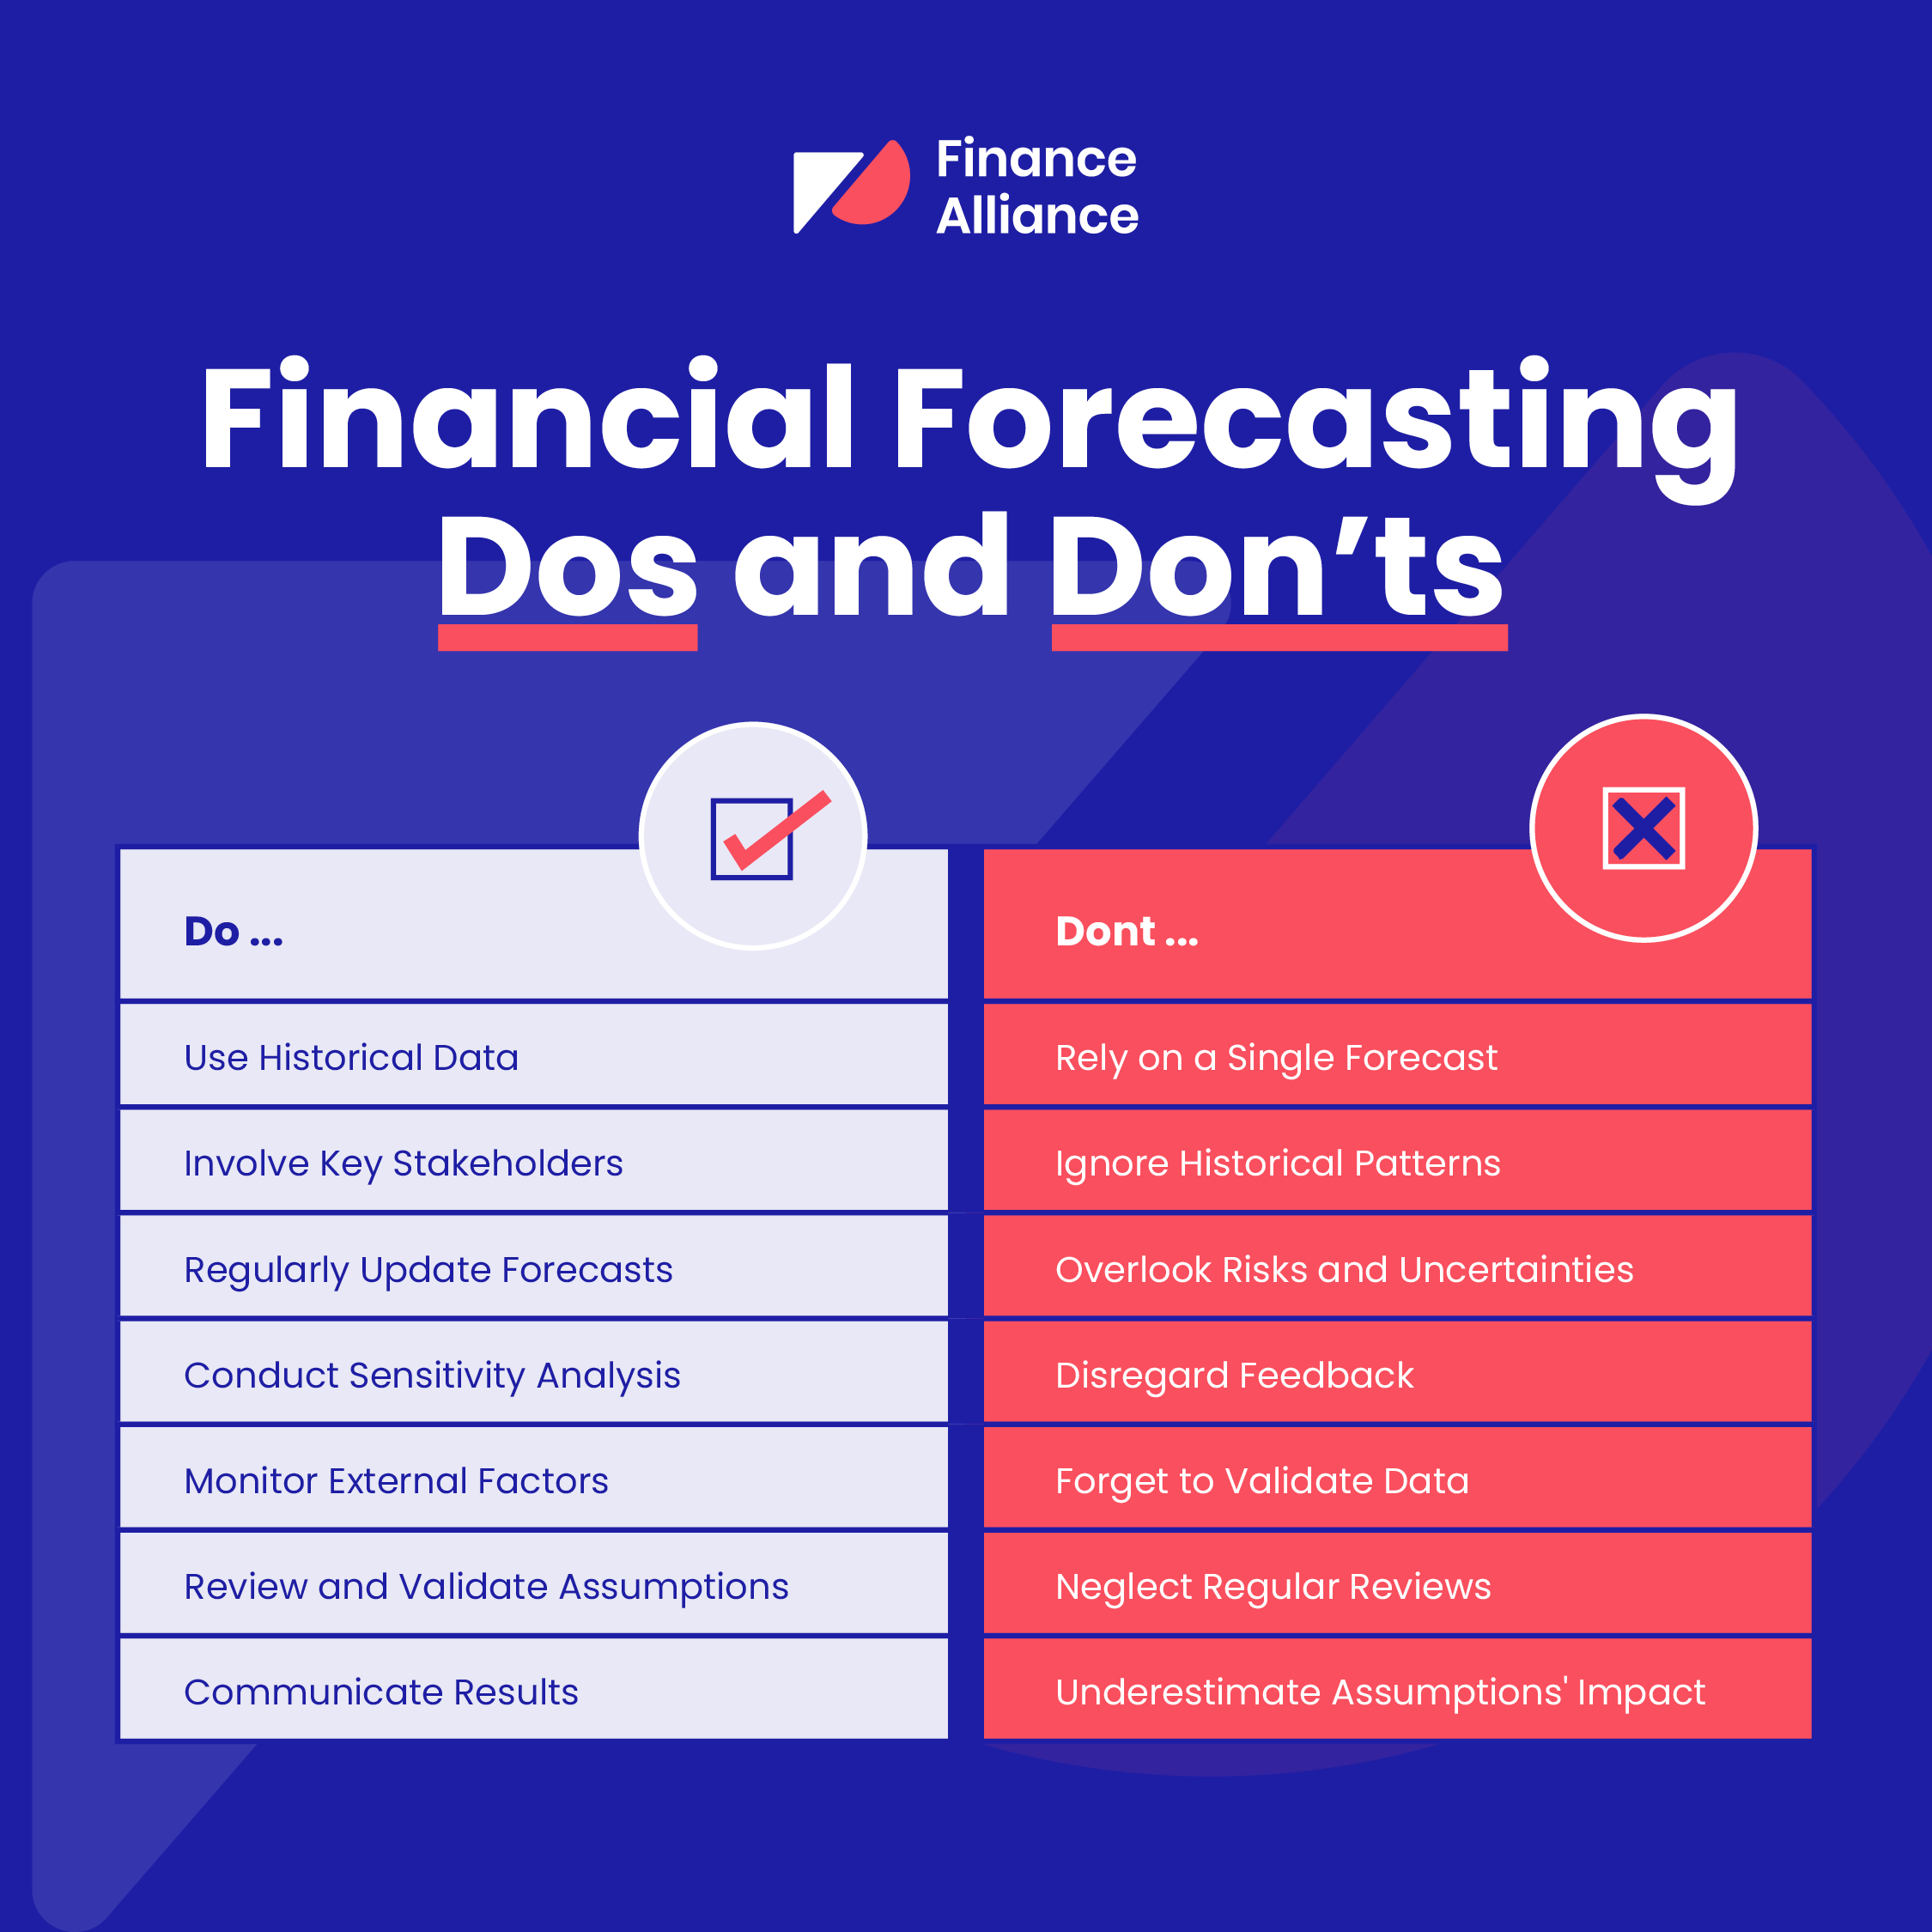 Financial forecasting dos and don'ts